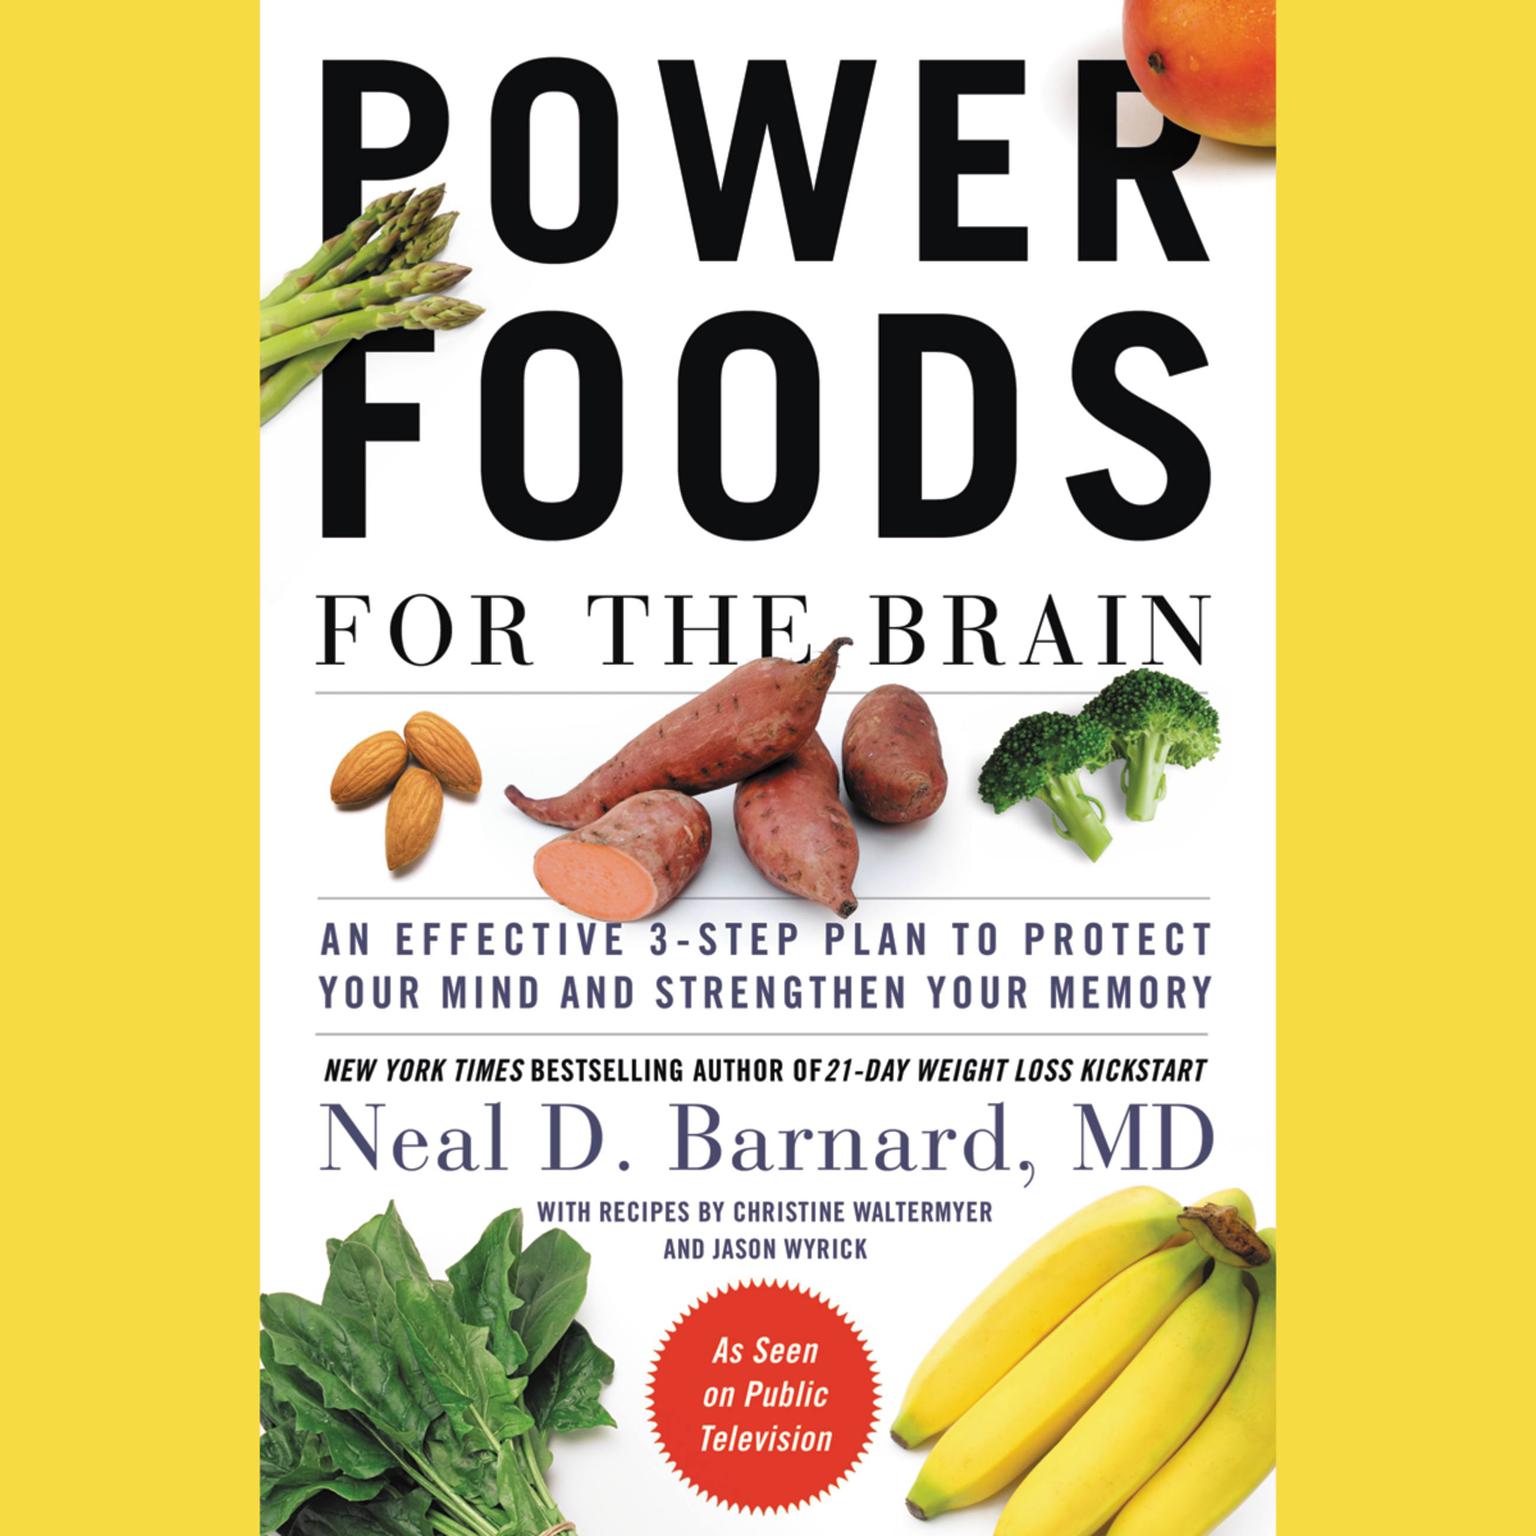 Power Foods for the Brain: An Effective 3-Step Plan to Protect Your Mind and Strengthen Your Memory Audiobook, by Neal D Barnard